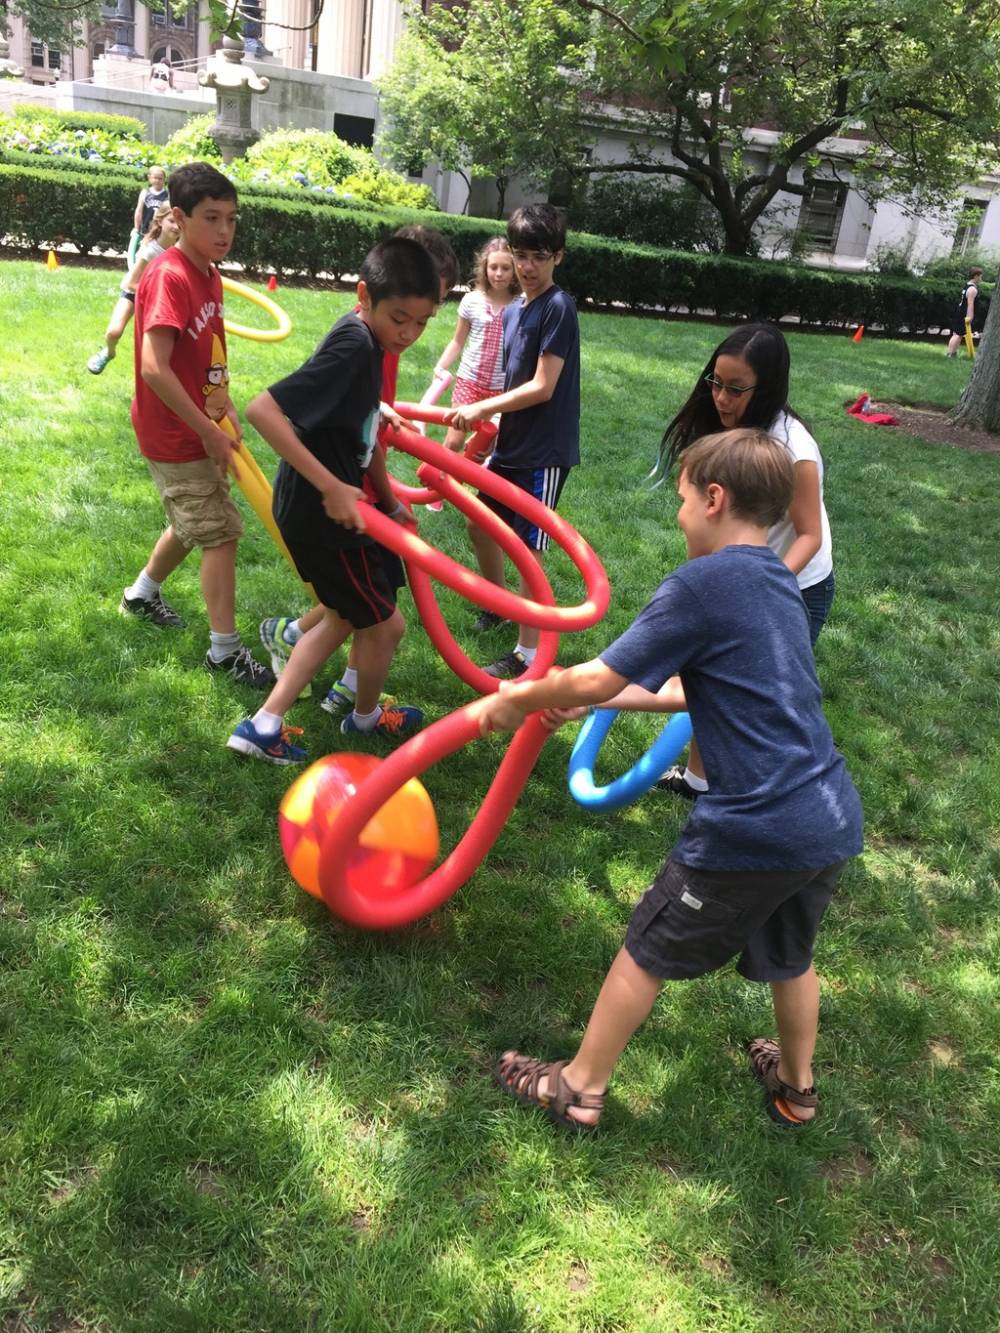 TOP NEW YORK ART CAMP: Columbia University - Little Lions Camp is a Top Art Summer Camp located in New York New York offering many fun and enriching Art and other camp programs. 